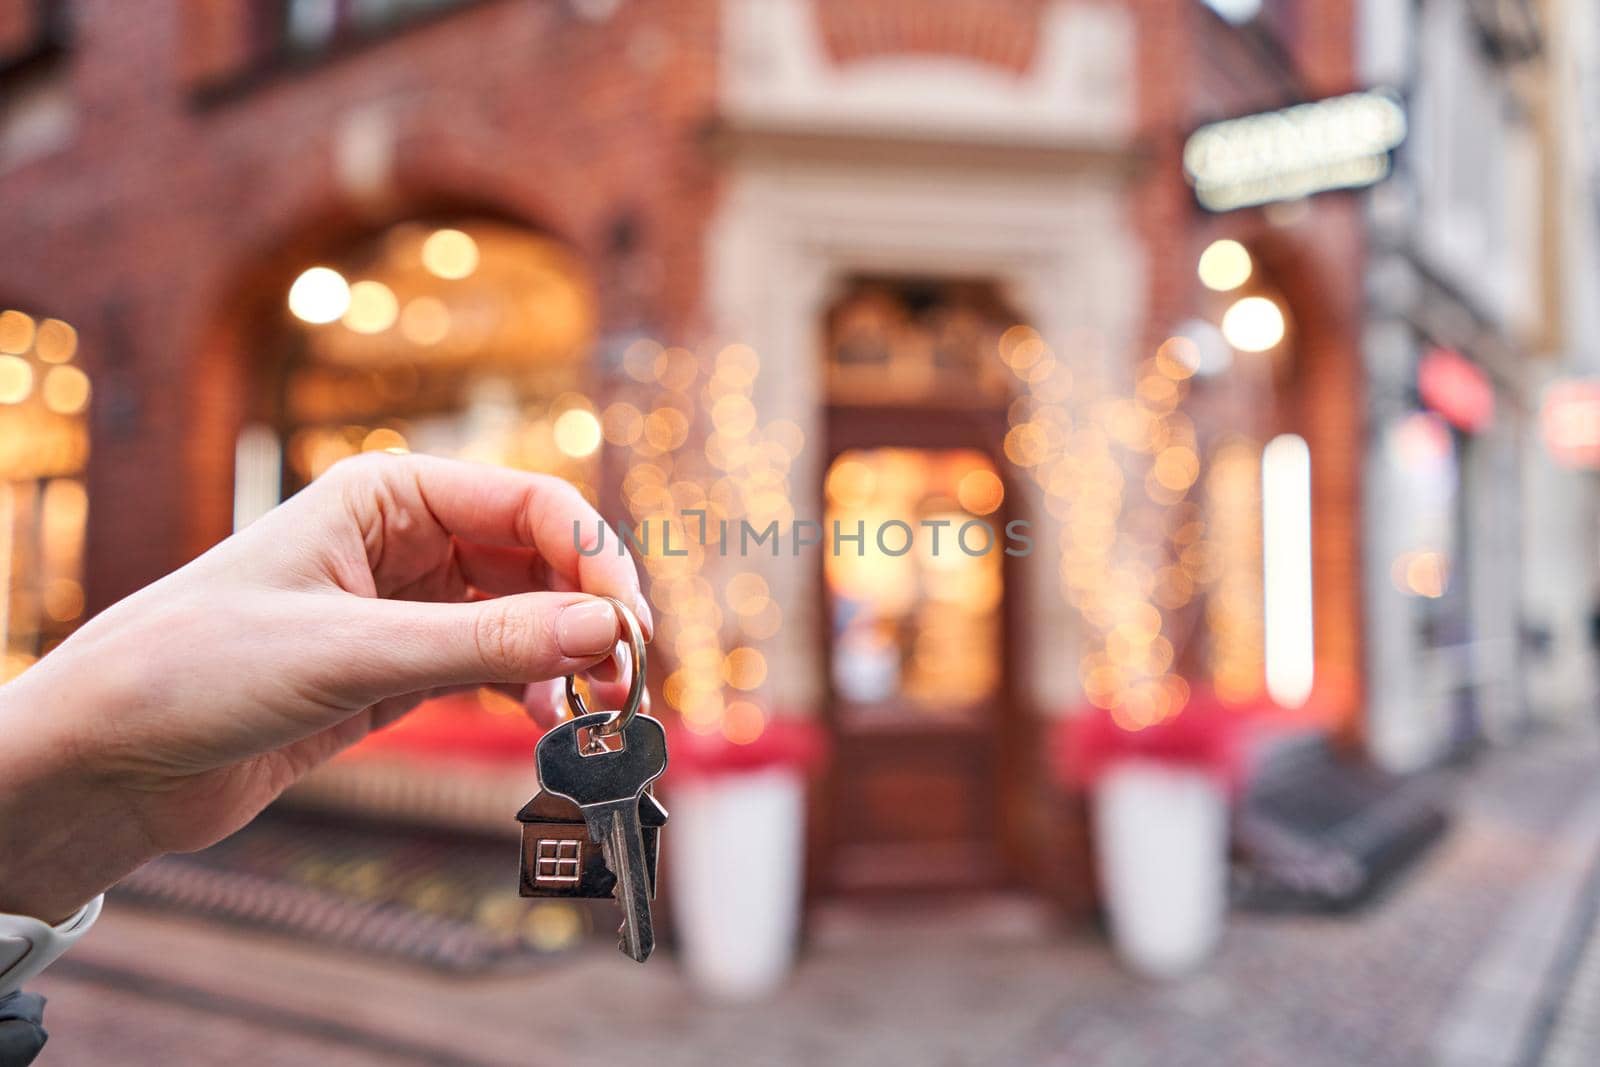 Mortgage or rent concept. Woman holding key with wooden house keychain . Real estate, hypothec, moving home or renting property. Christmas mood in blurred background.